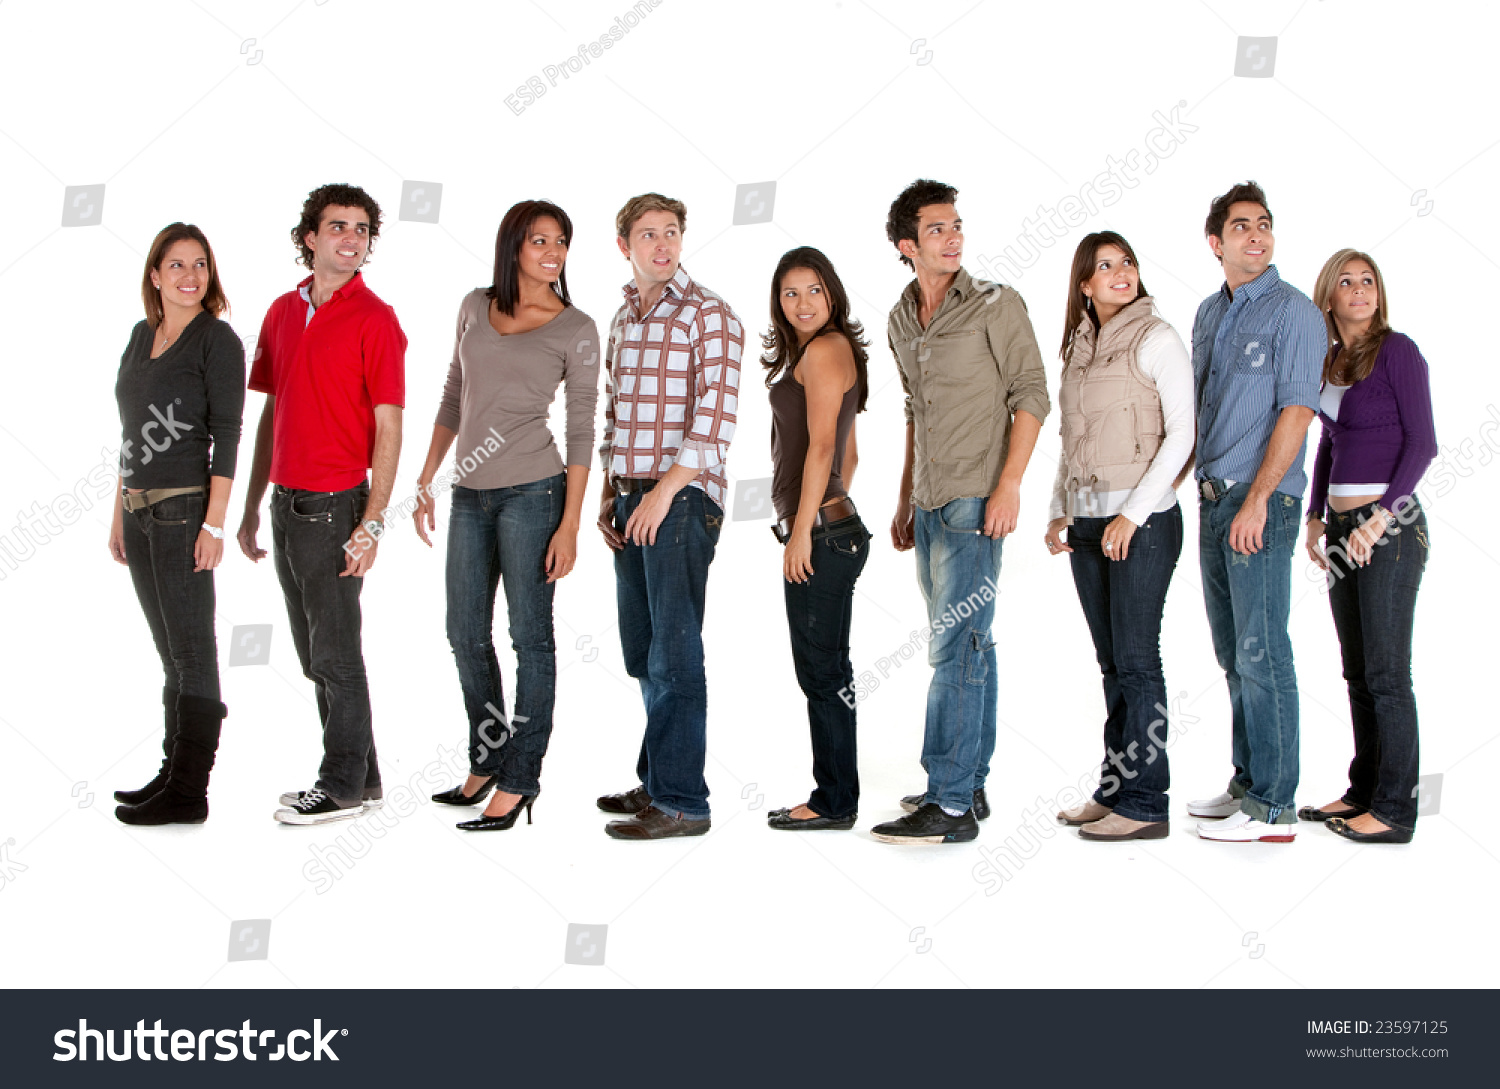 Large Group Casual People Looking Back Stock Photo 23597125 | Shutterstock